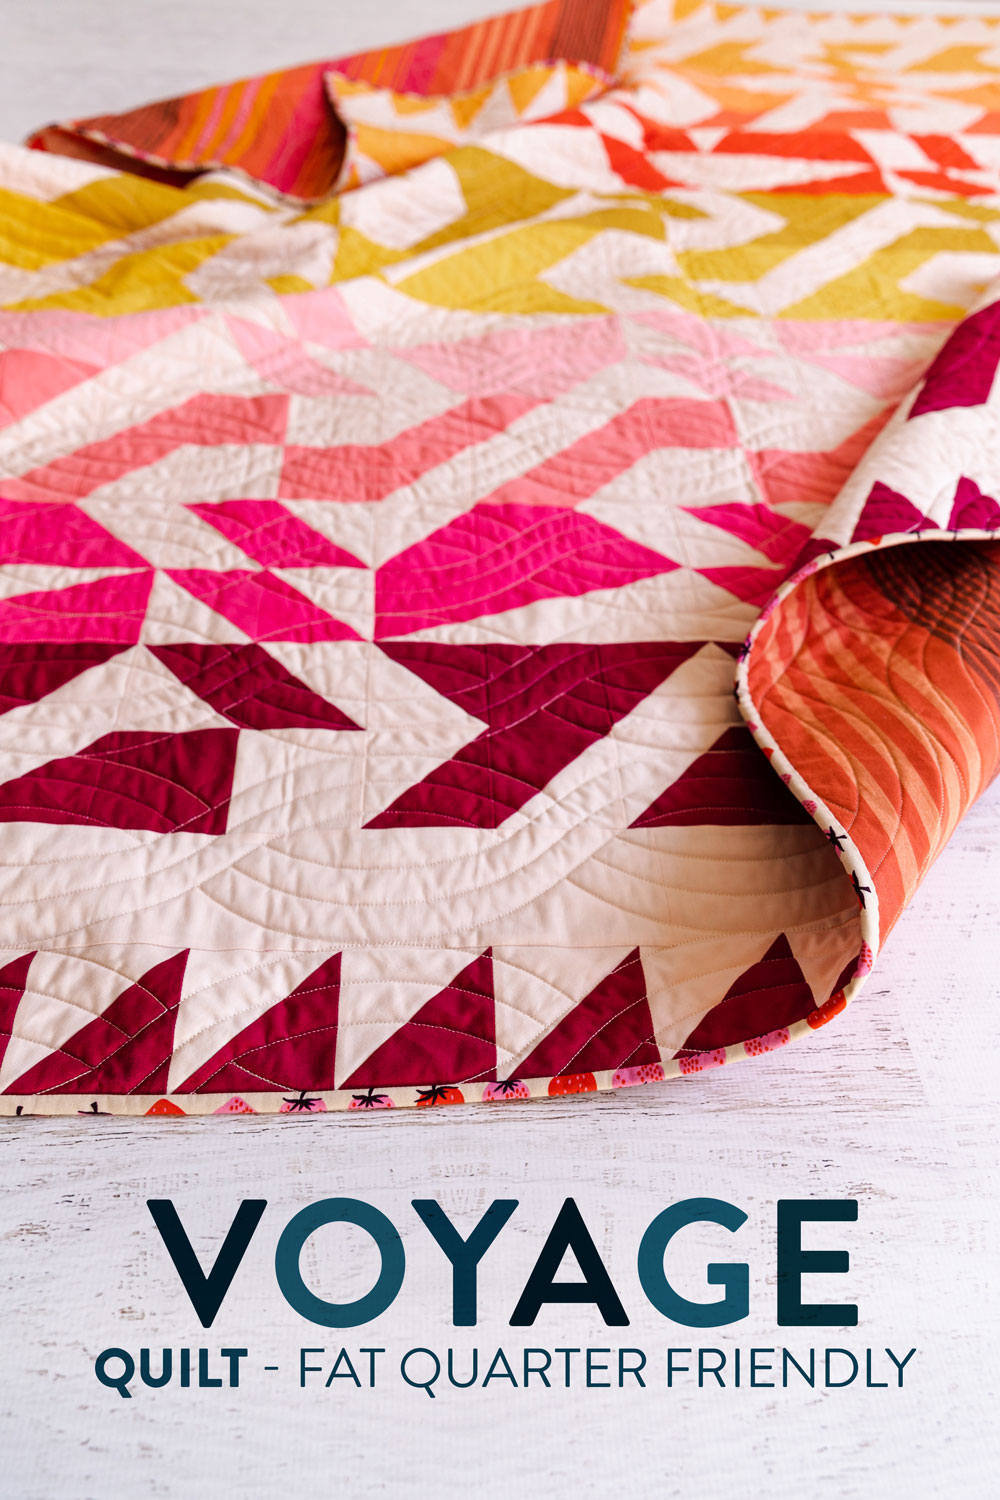 The Voyage quilt pattern is fat quarter friendly and a great quilt pattern for beginners – includes lots of extra video tutorials.